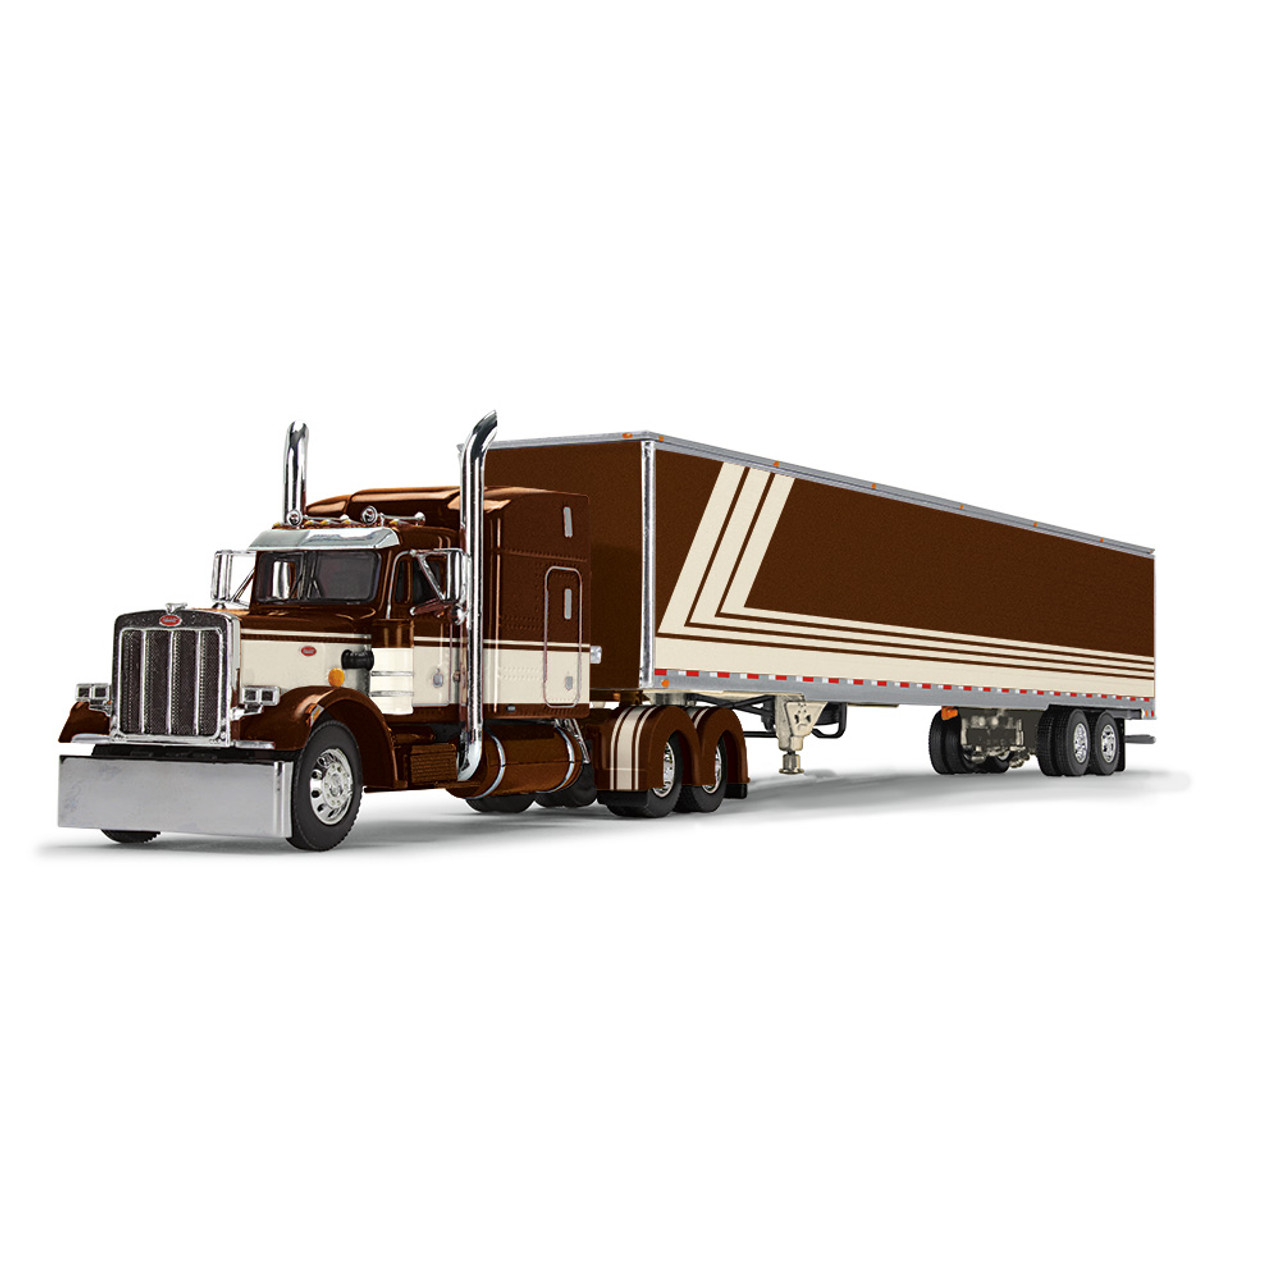 60-1675 - Brown/Cream 1/64 scale Peterbilt Model 359 with 63" Mid-Roof Sleeper & 53’ Utility Trailer